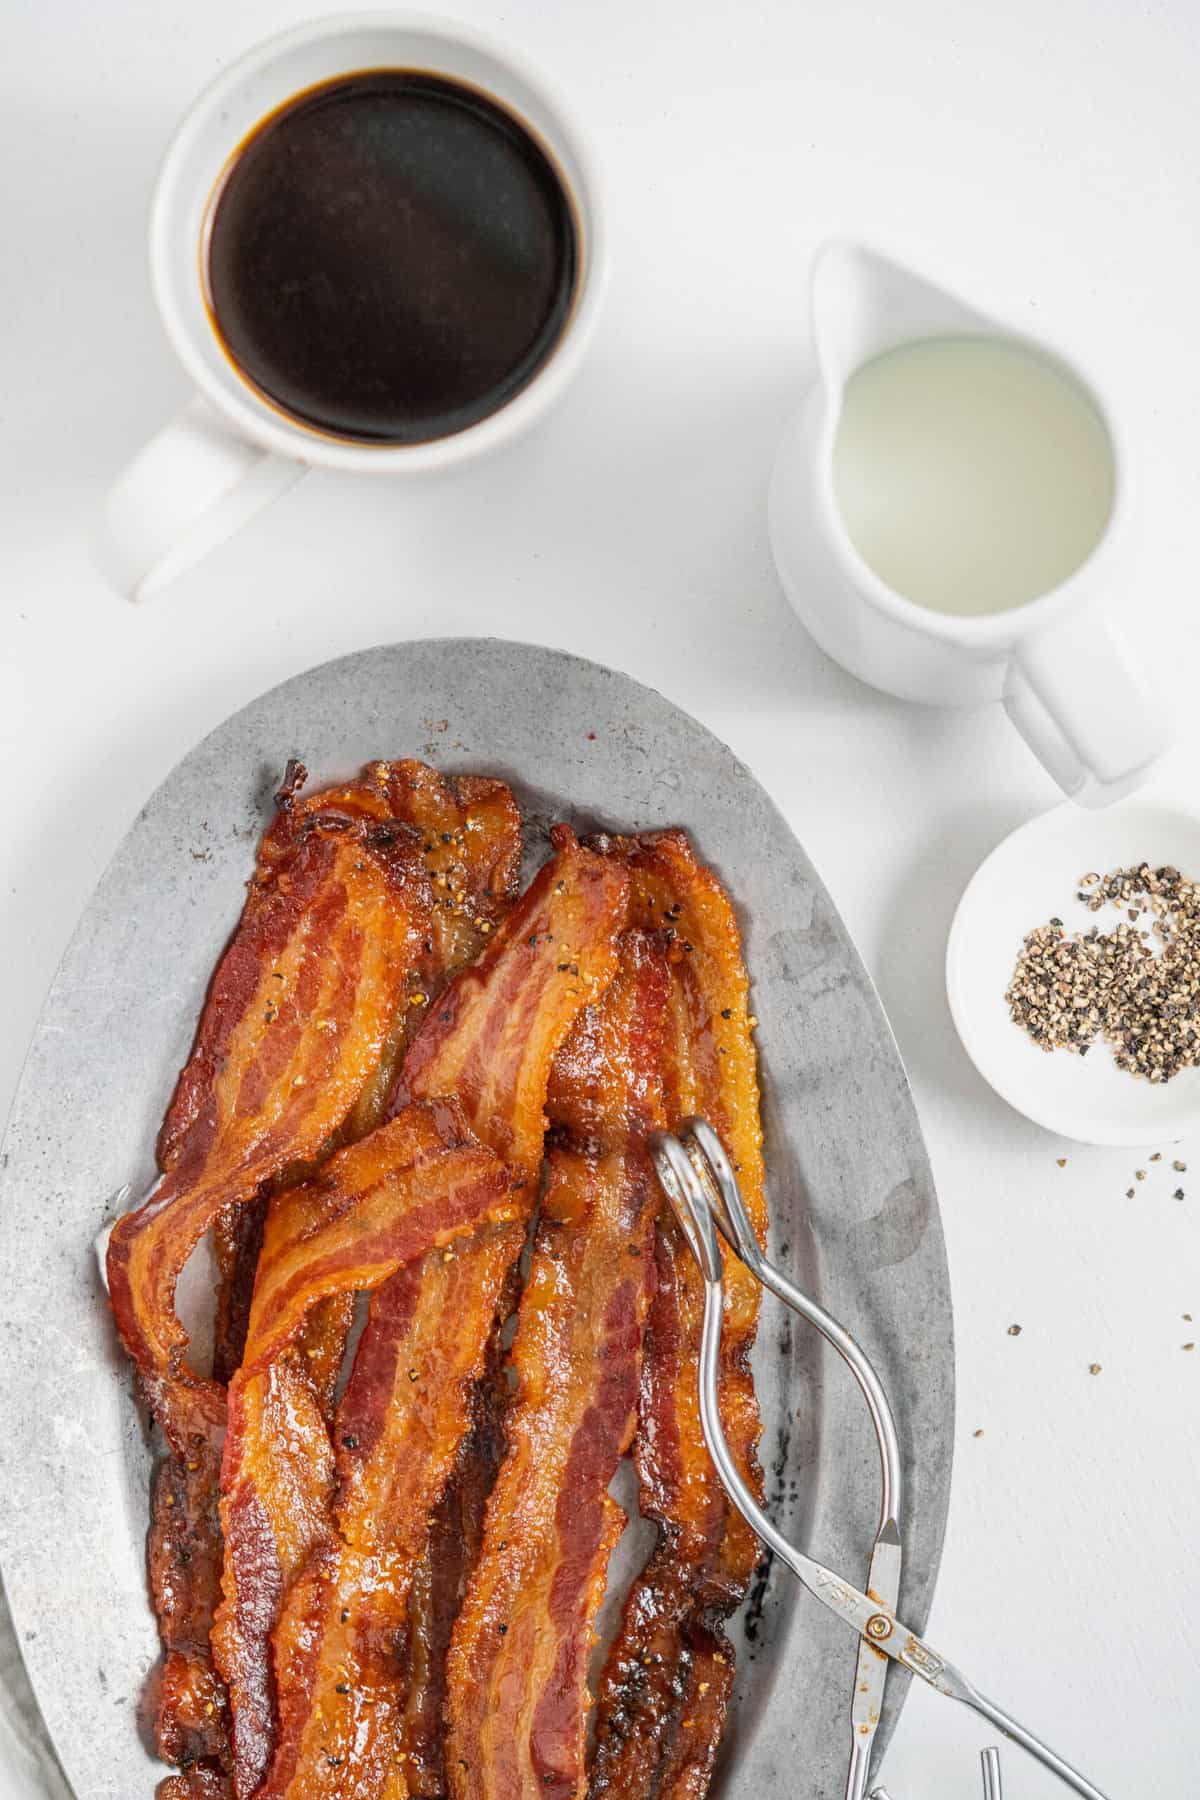 a platter of candied bacon, served with coffee and cream